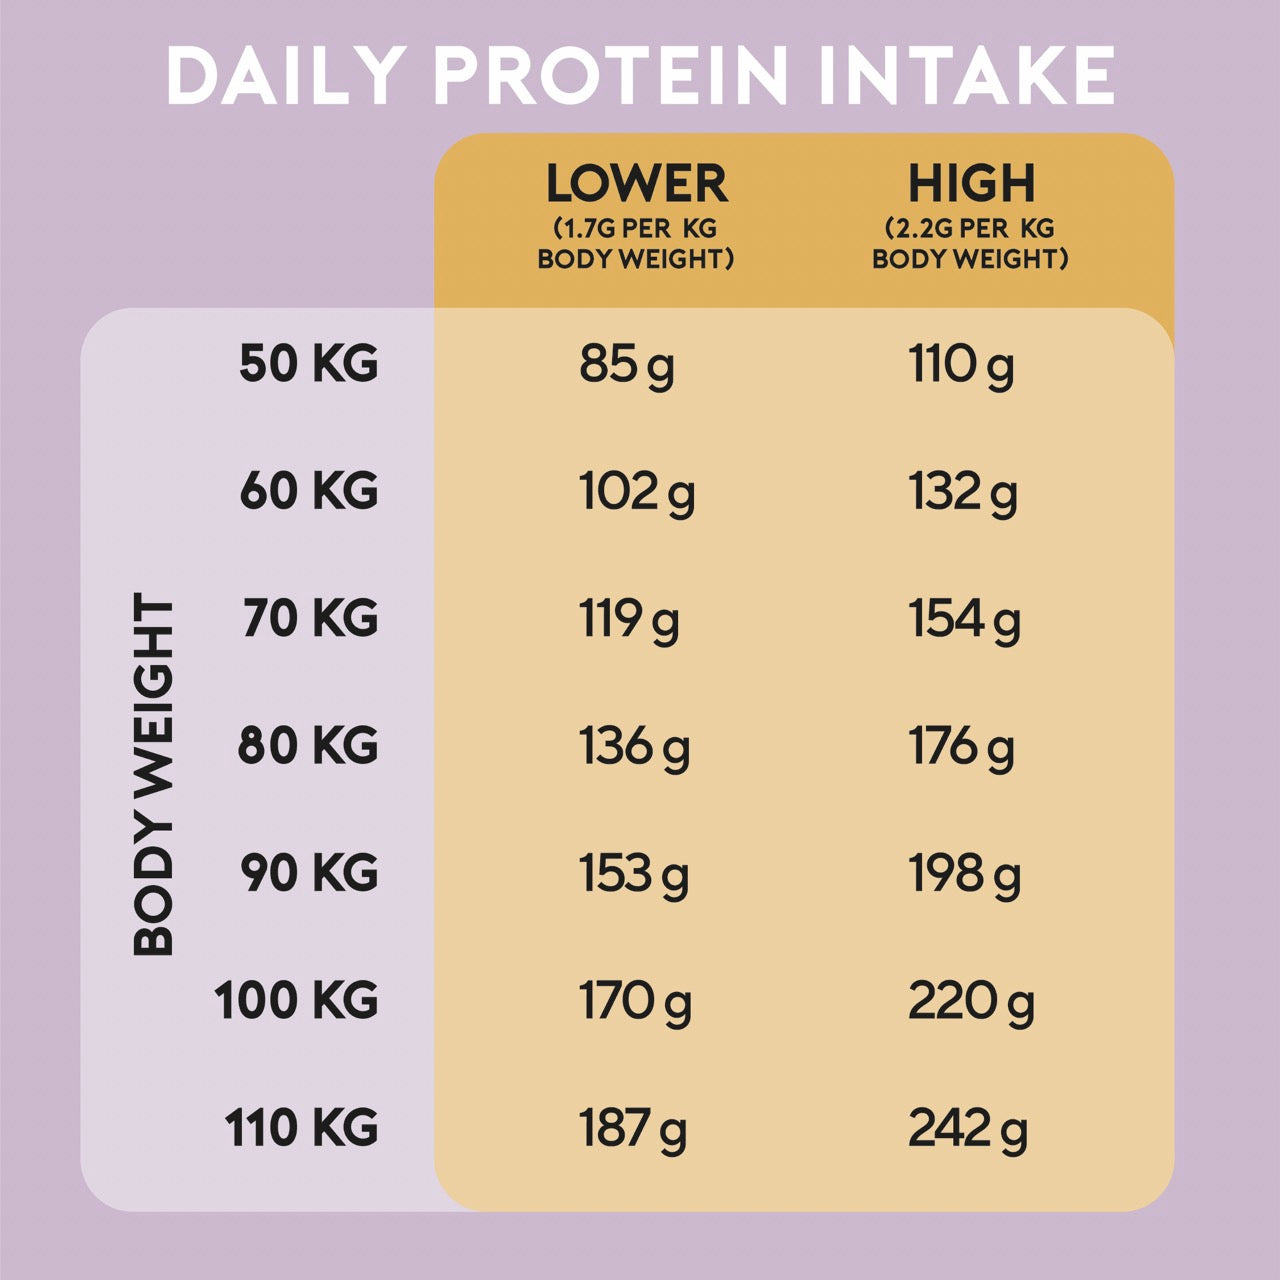 Example of Daily Protein Intake by Body Weight